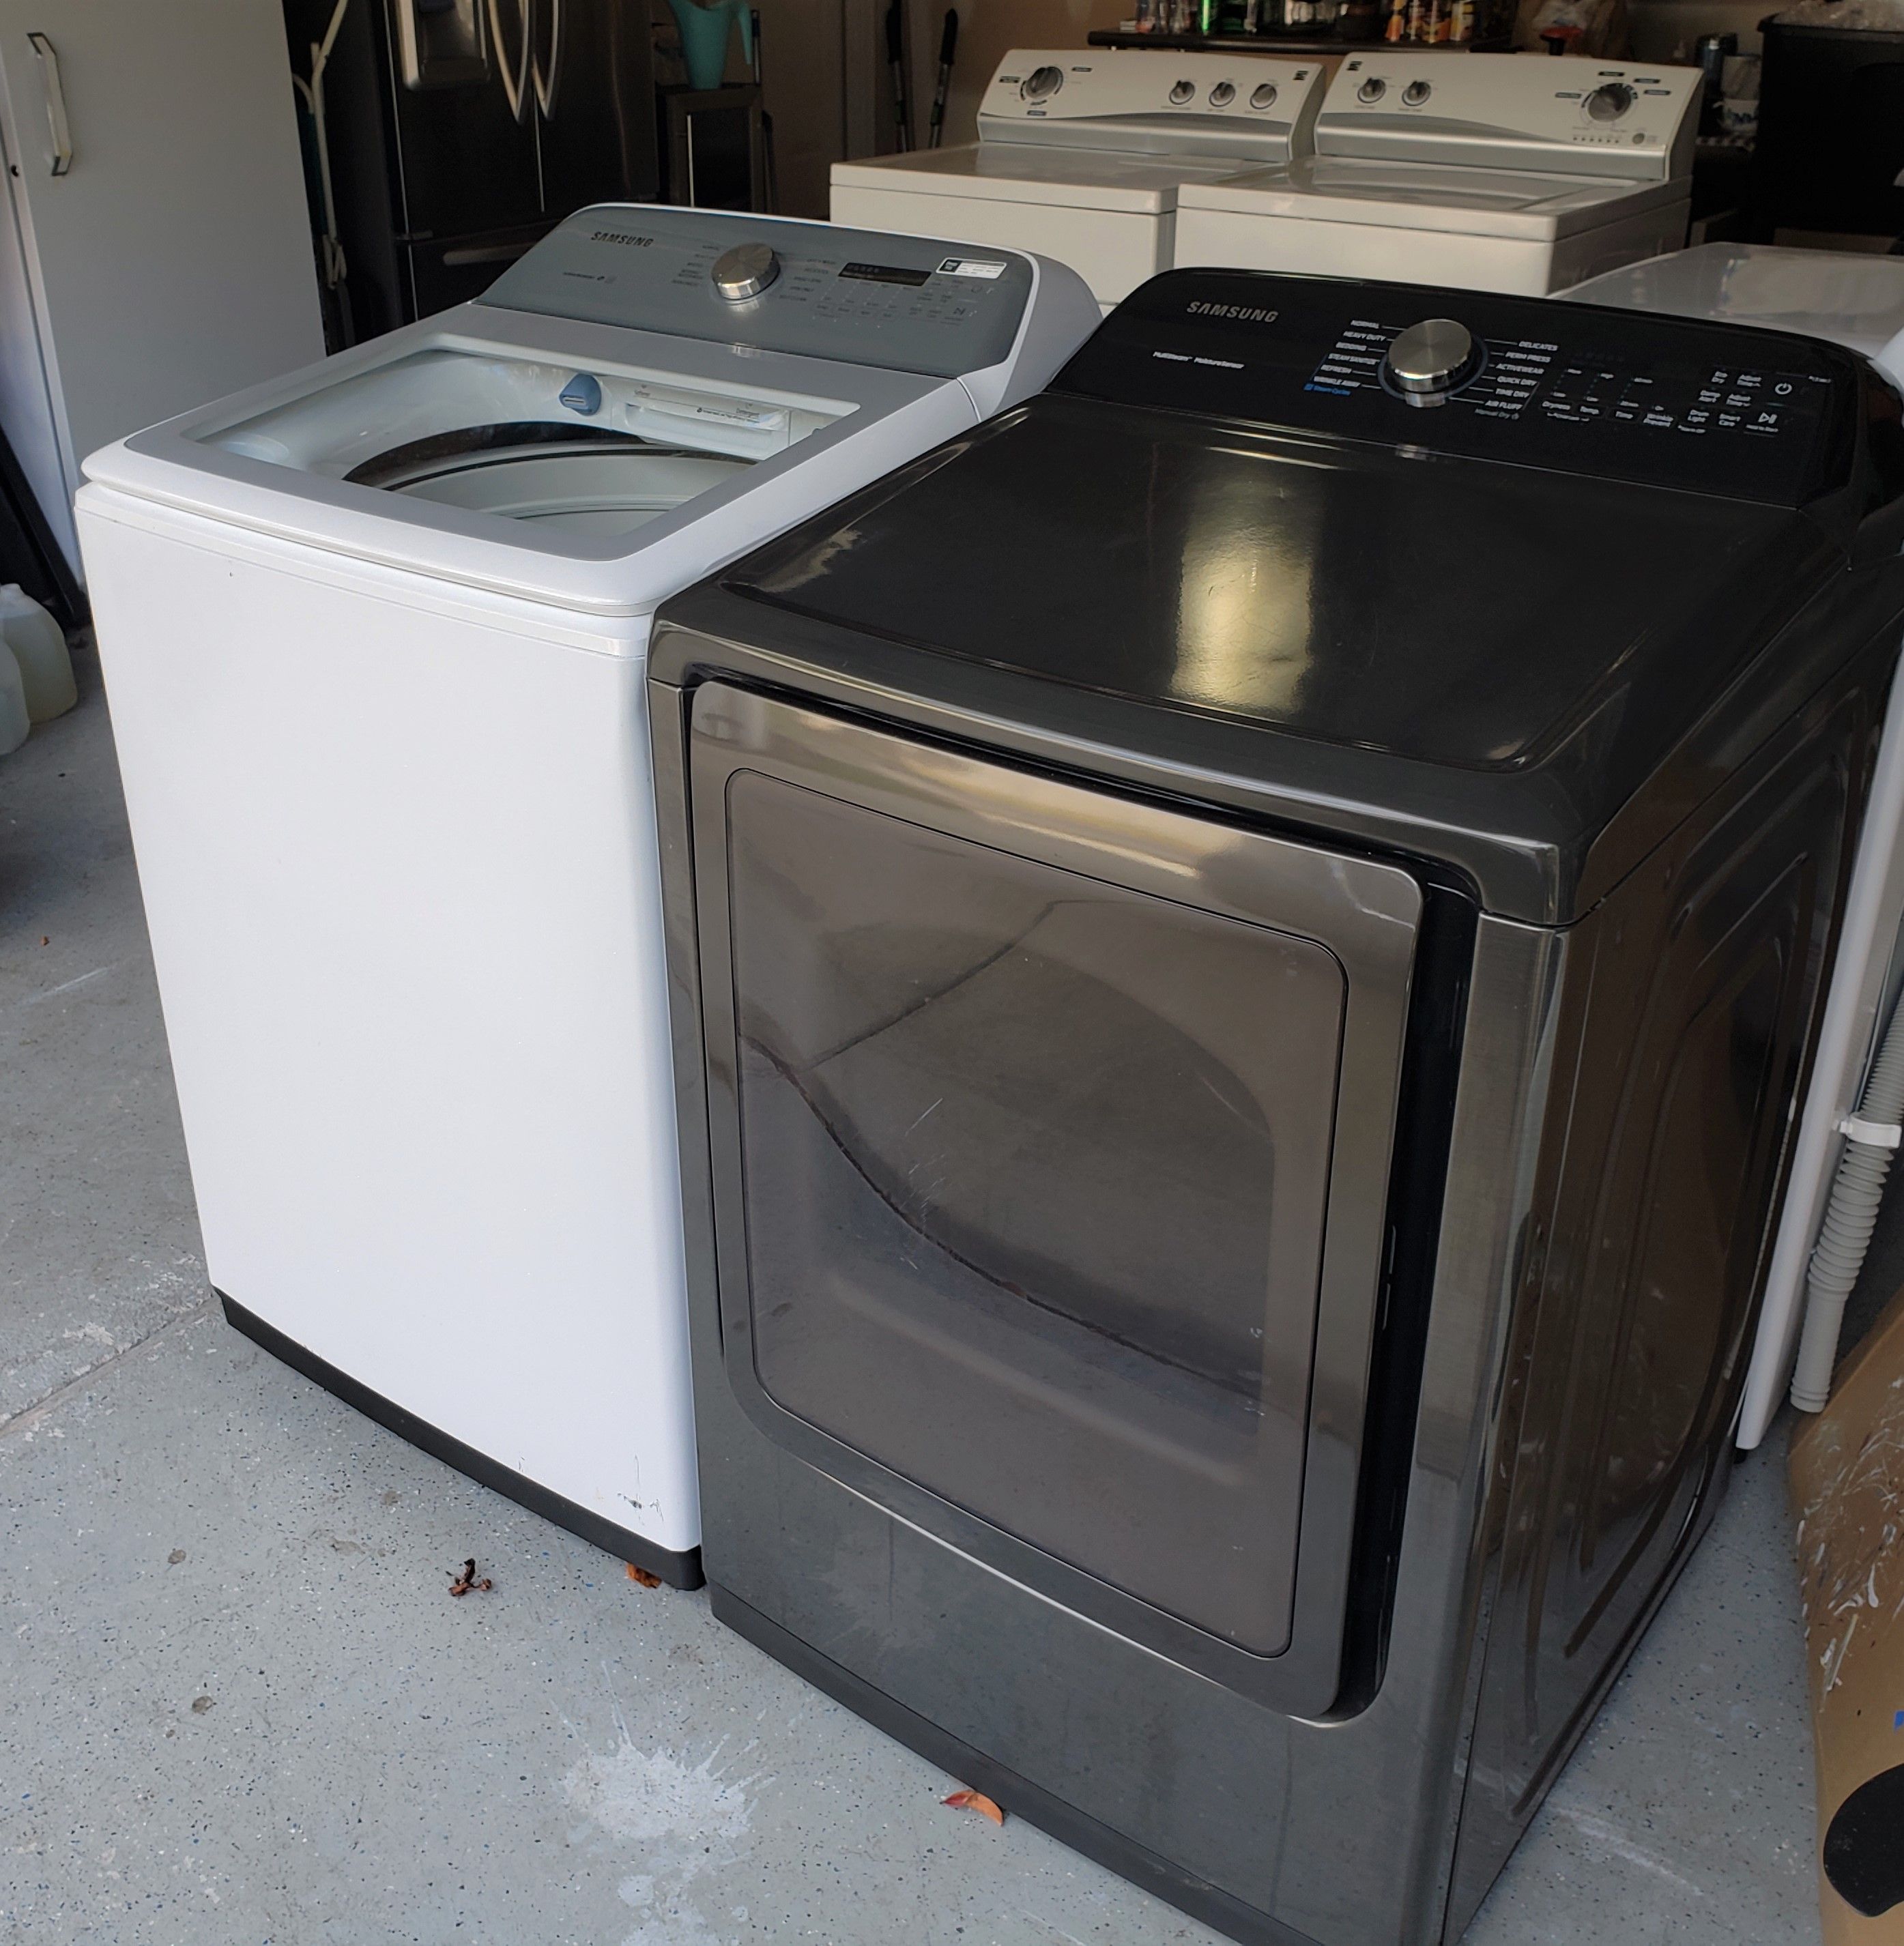 Like New Samsung Top Load Washer & Electric Dryer Set! Can Deliver! Come See Anytime in my VB Garage! Delivery! Military Discount! Near Town Center!